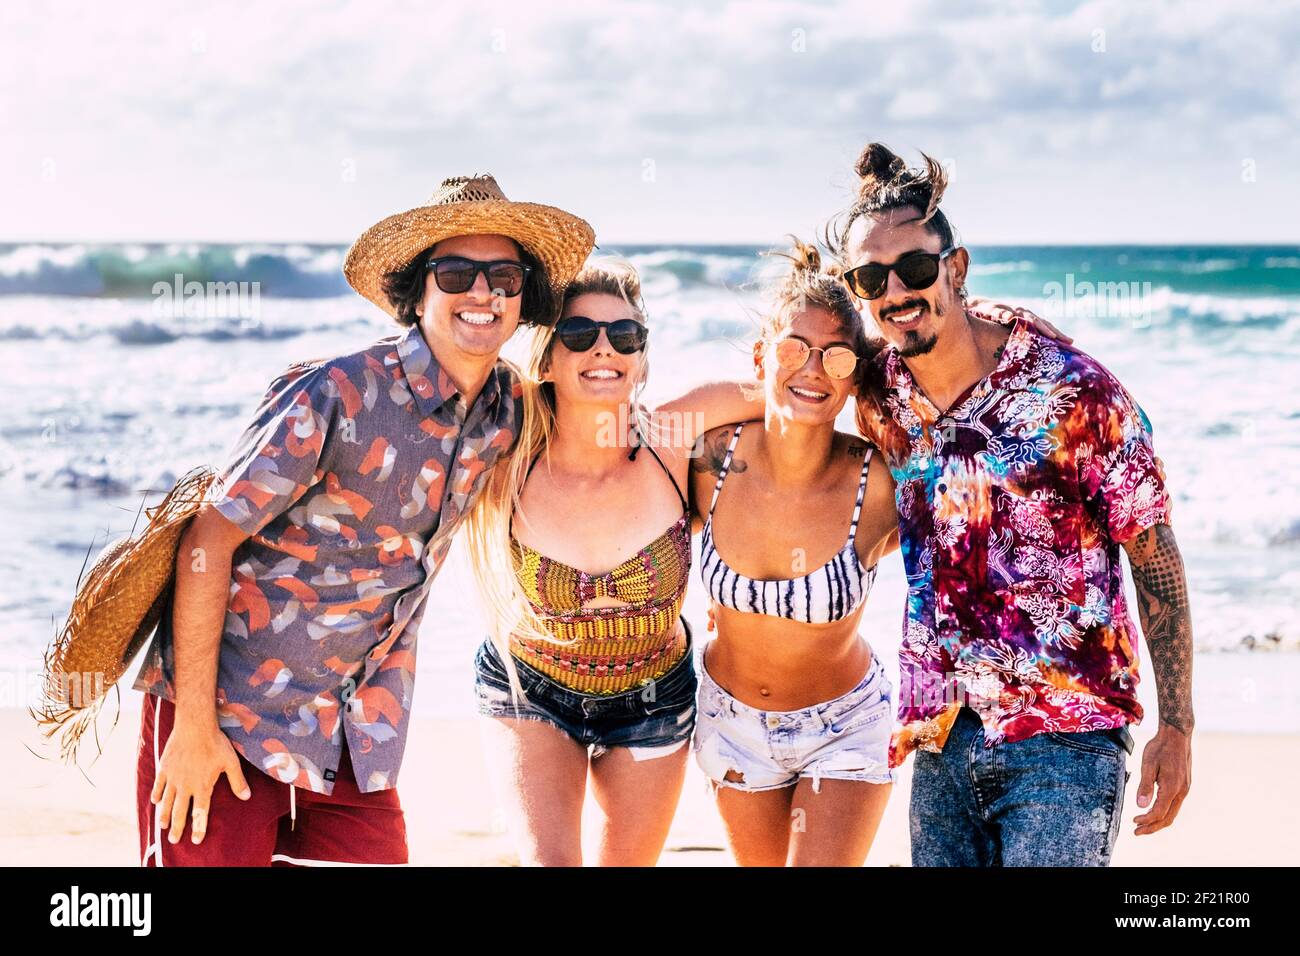 Group of young people friends have fun and enjoy friendship at the beach in summer holiday vacation smiling and laughing - blue ocean and sky backgrou Stock Photo